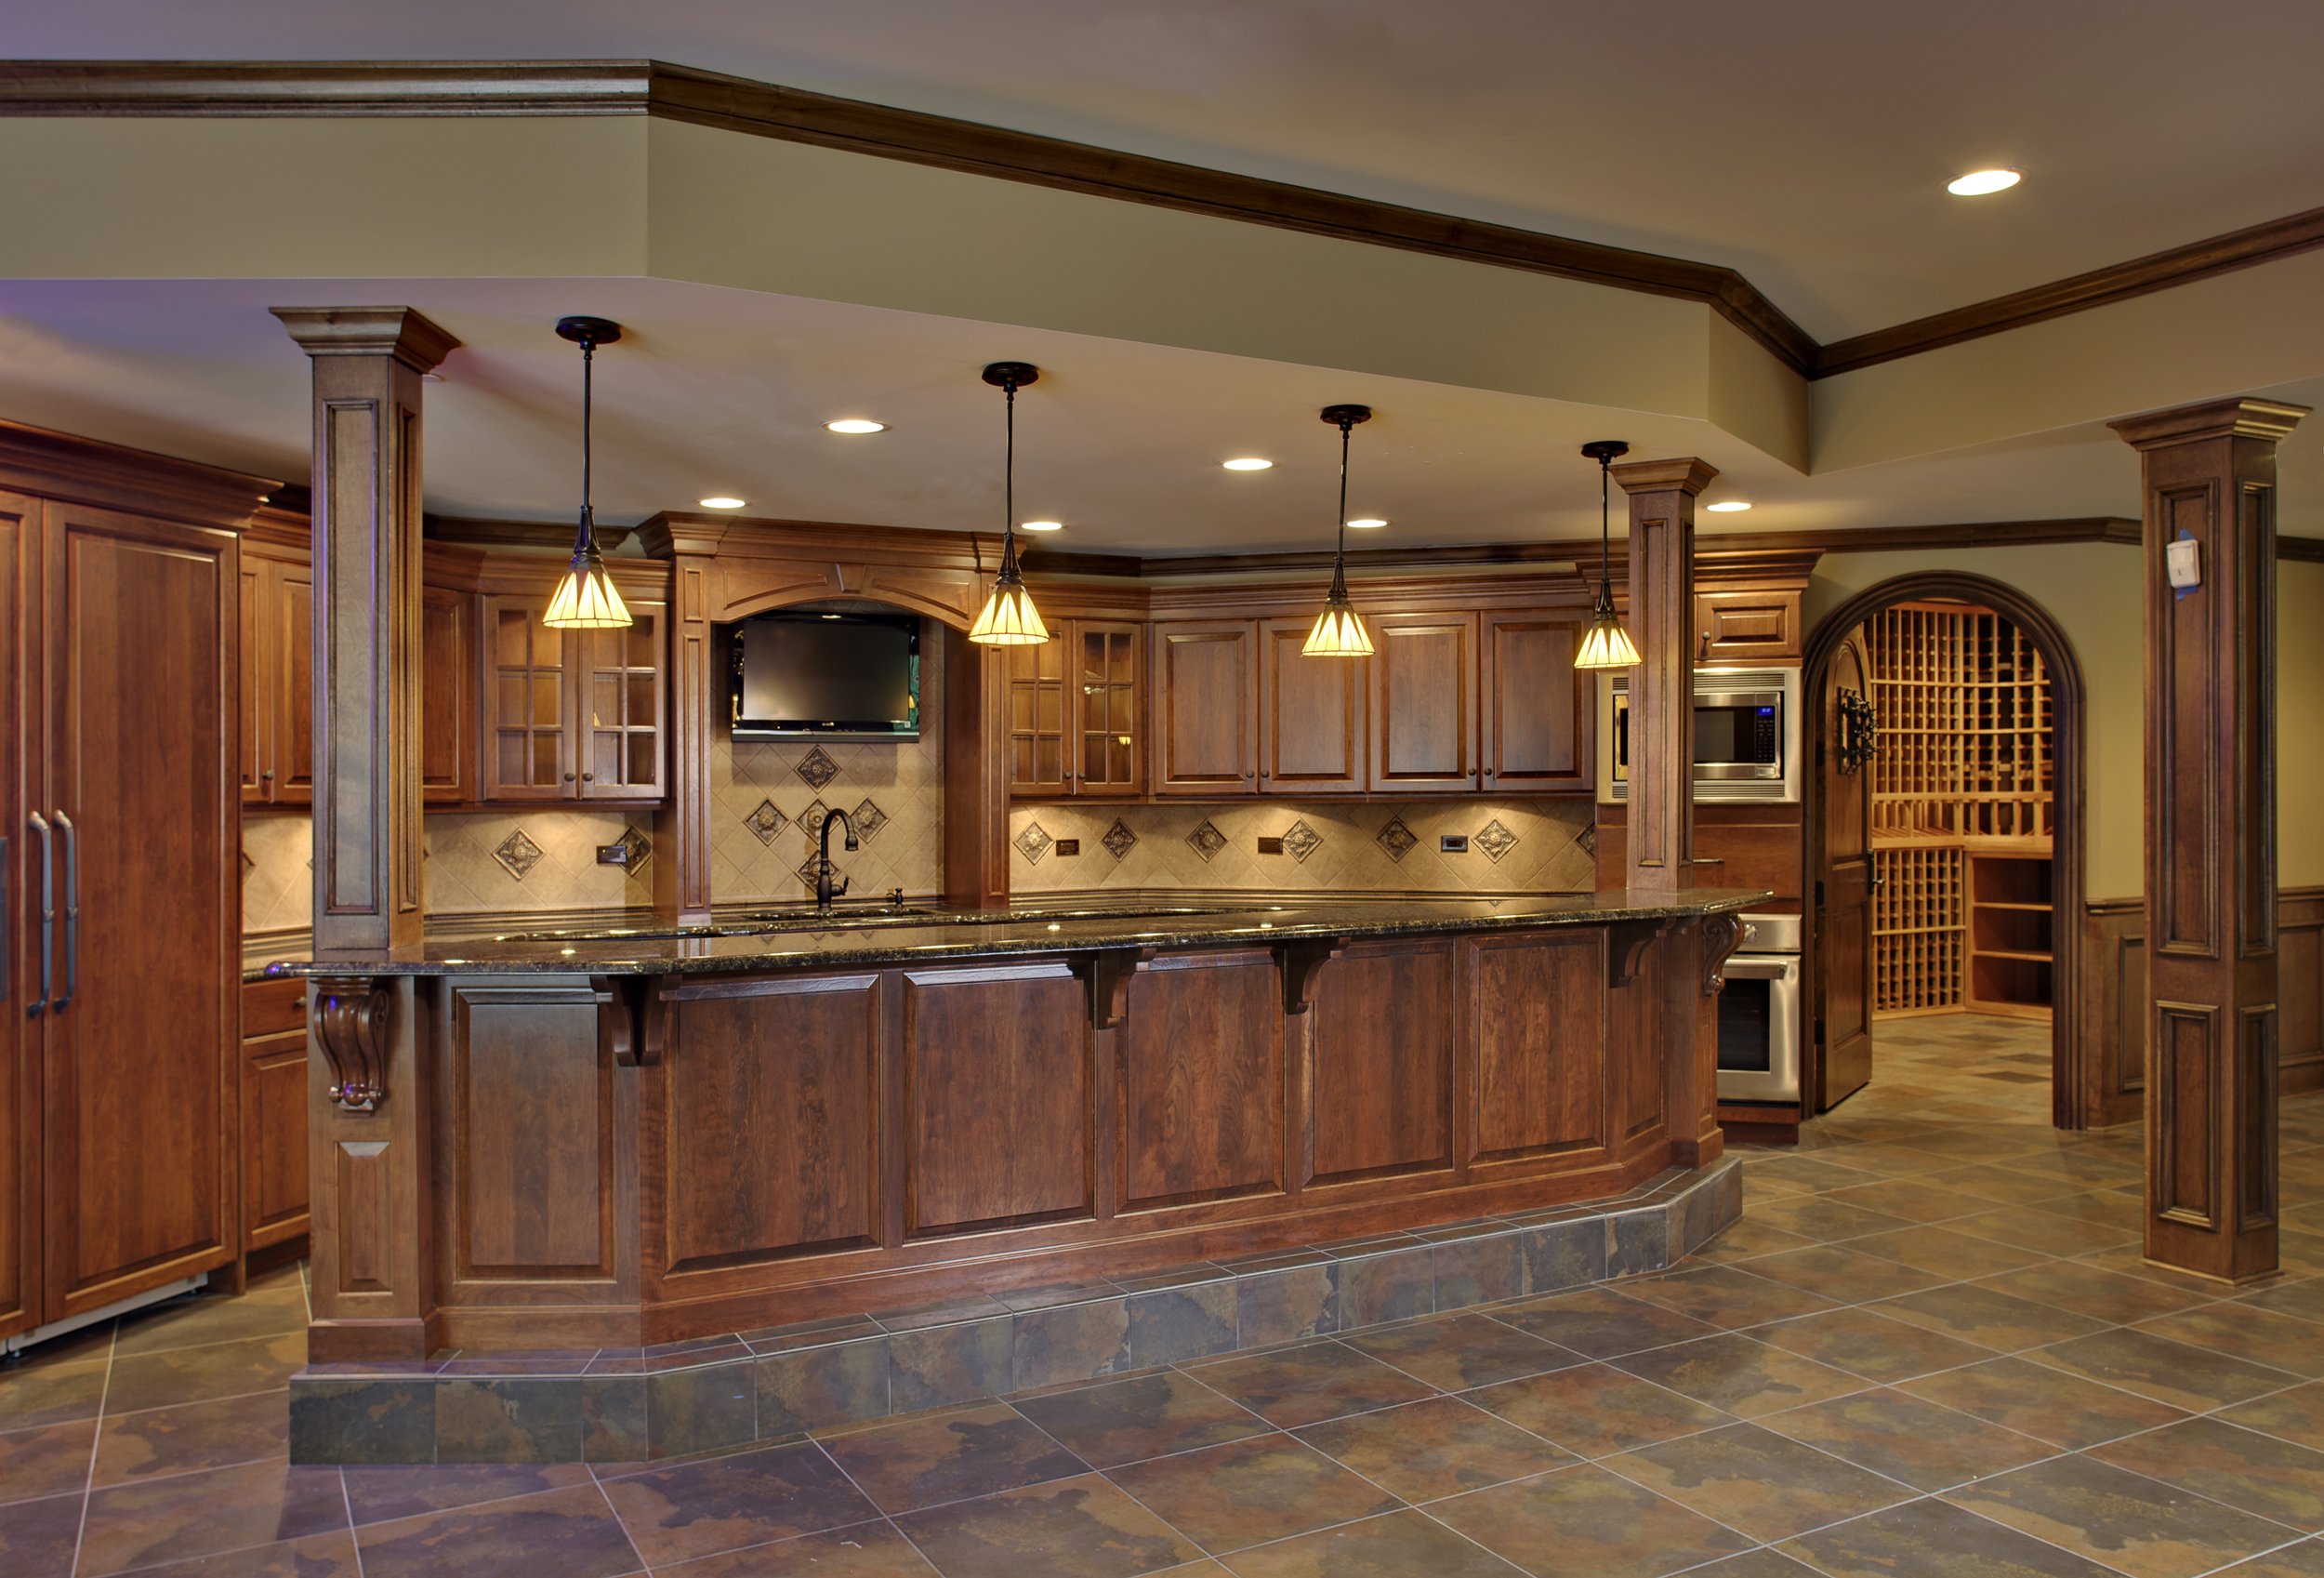 HI END FINISHED BASEMENT WITH WINE CELLER (WITH CURVED DOOR) &amp; CUSTOM FULL KITCHEN BAR IN OAK BROOK IL.